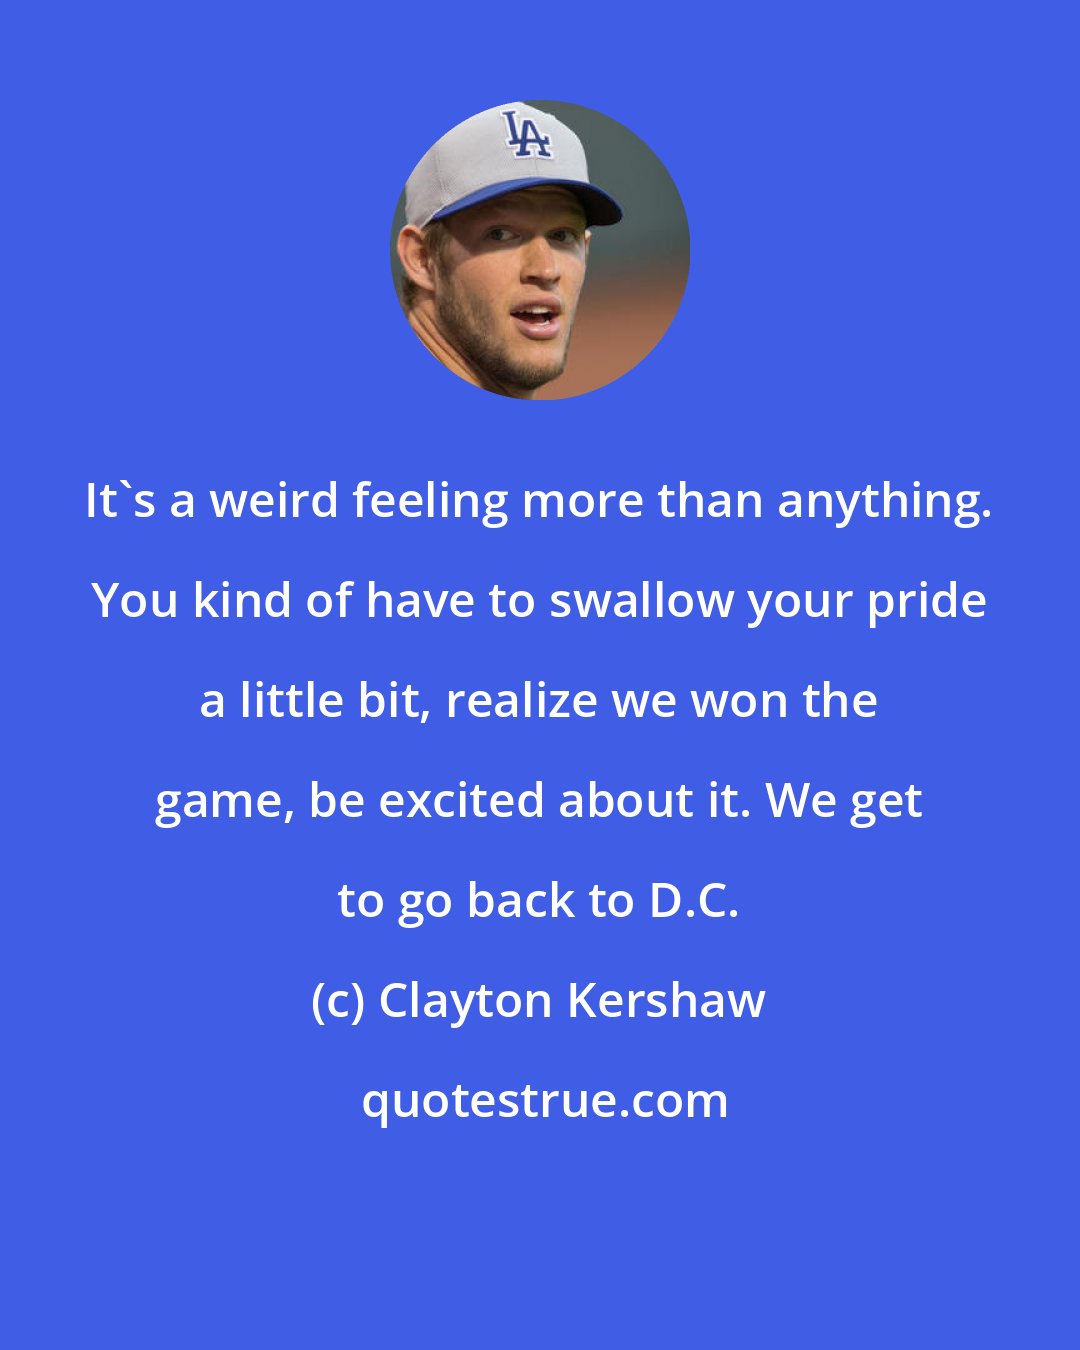 Clayton Kershaw: It's a weird feeling more than anything. You kind of have to swallow your pride a little bit, realize we won the game, be excited about it. We get to go back to D.C.